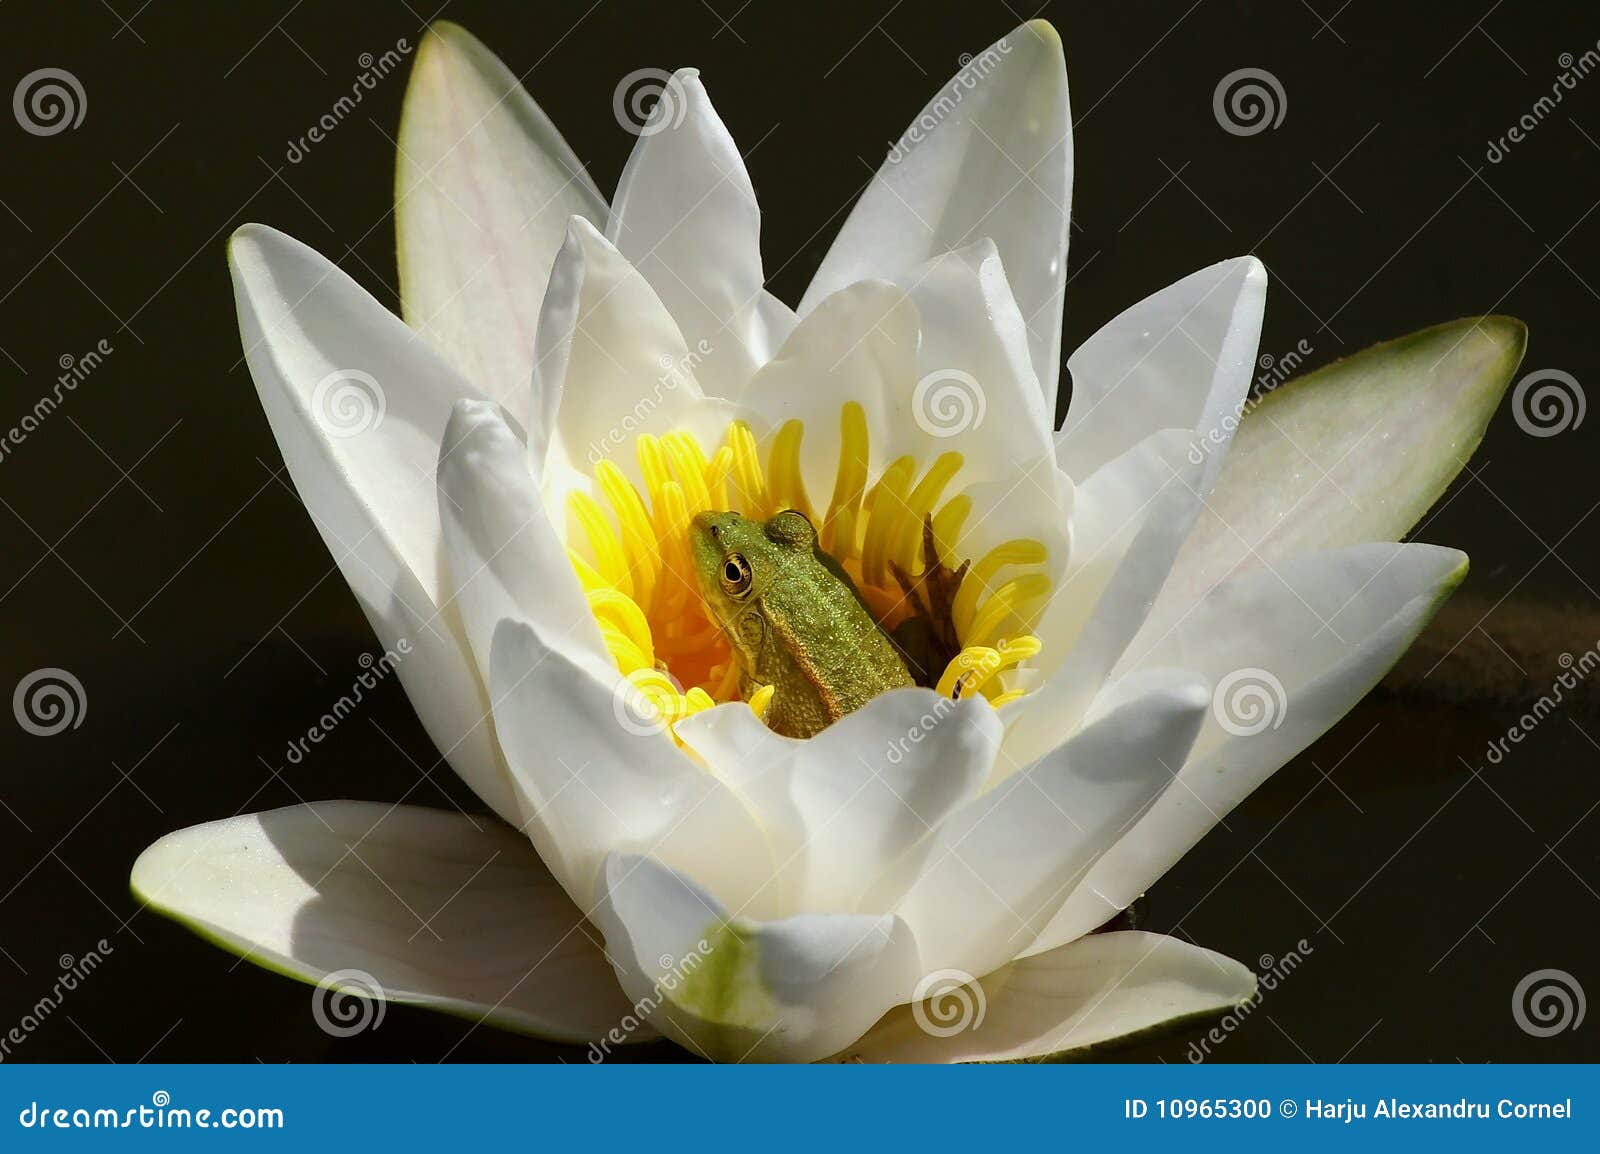 frog on waterlily flower